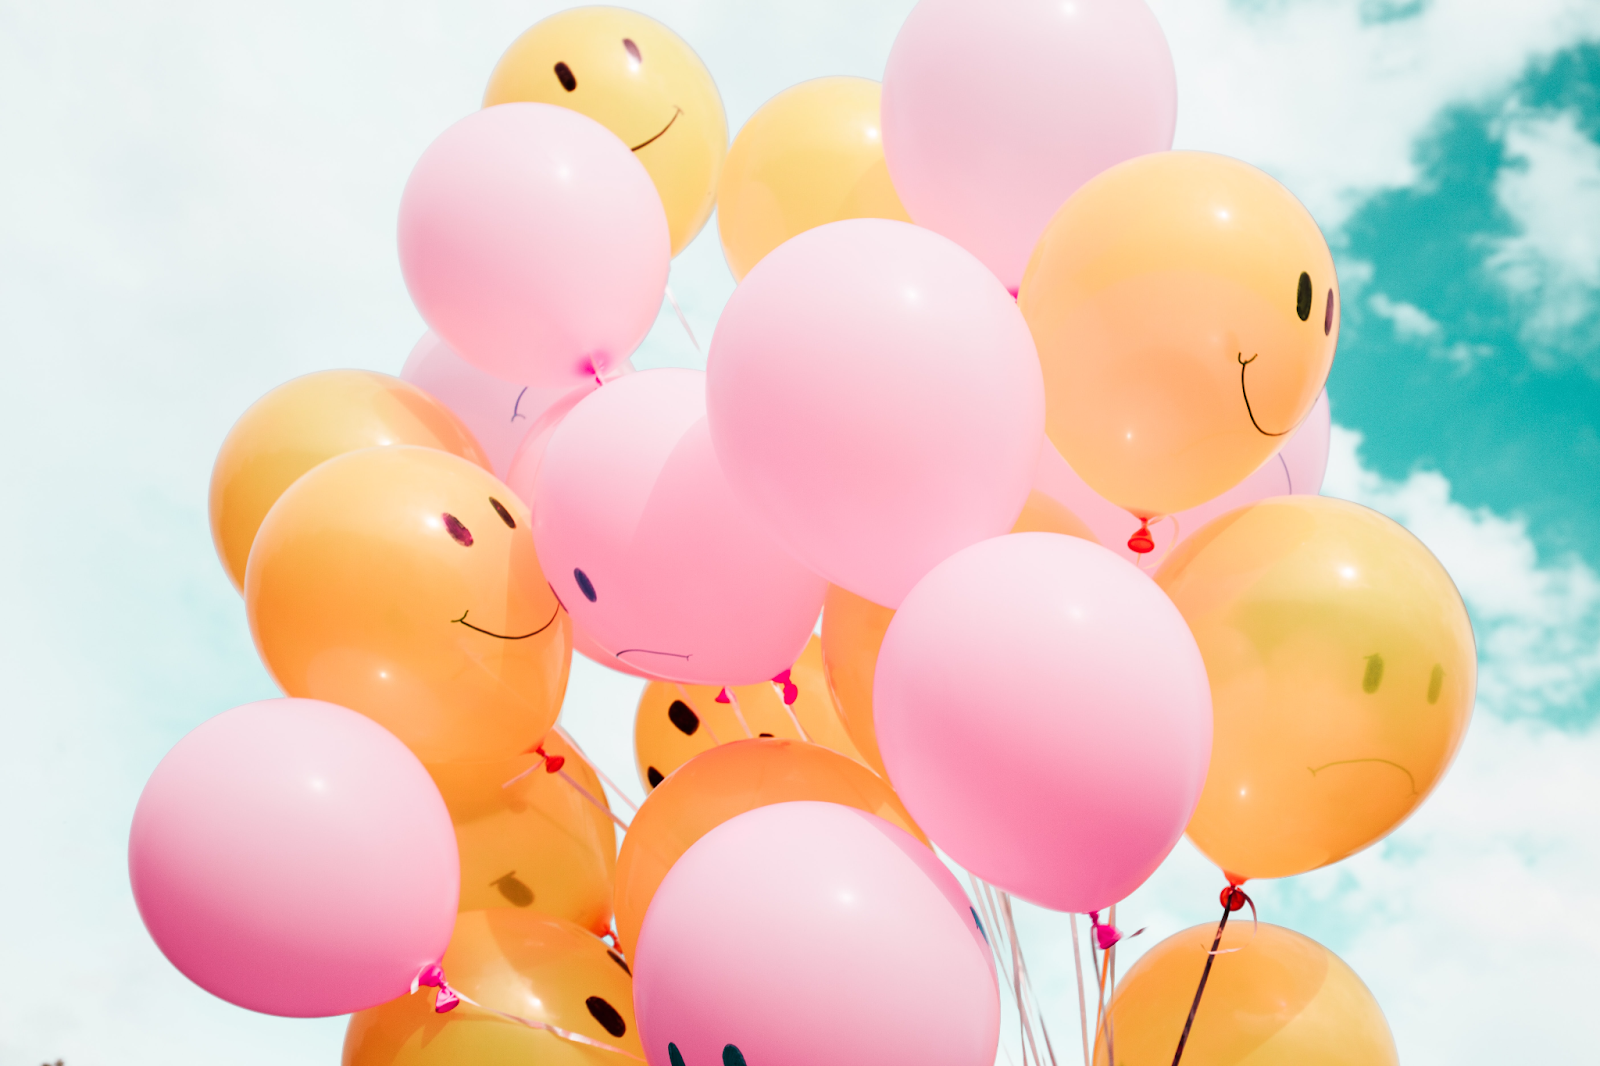 balloons with a happy face on it soft skills